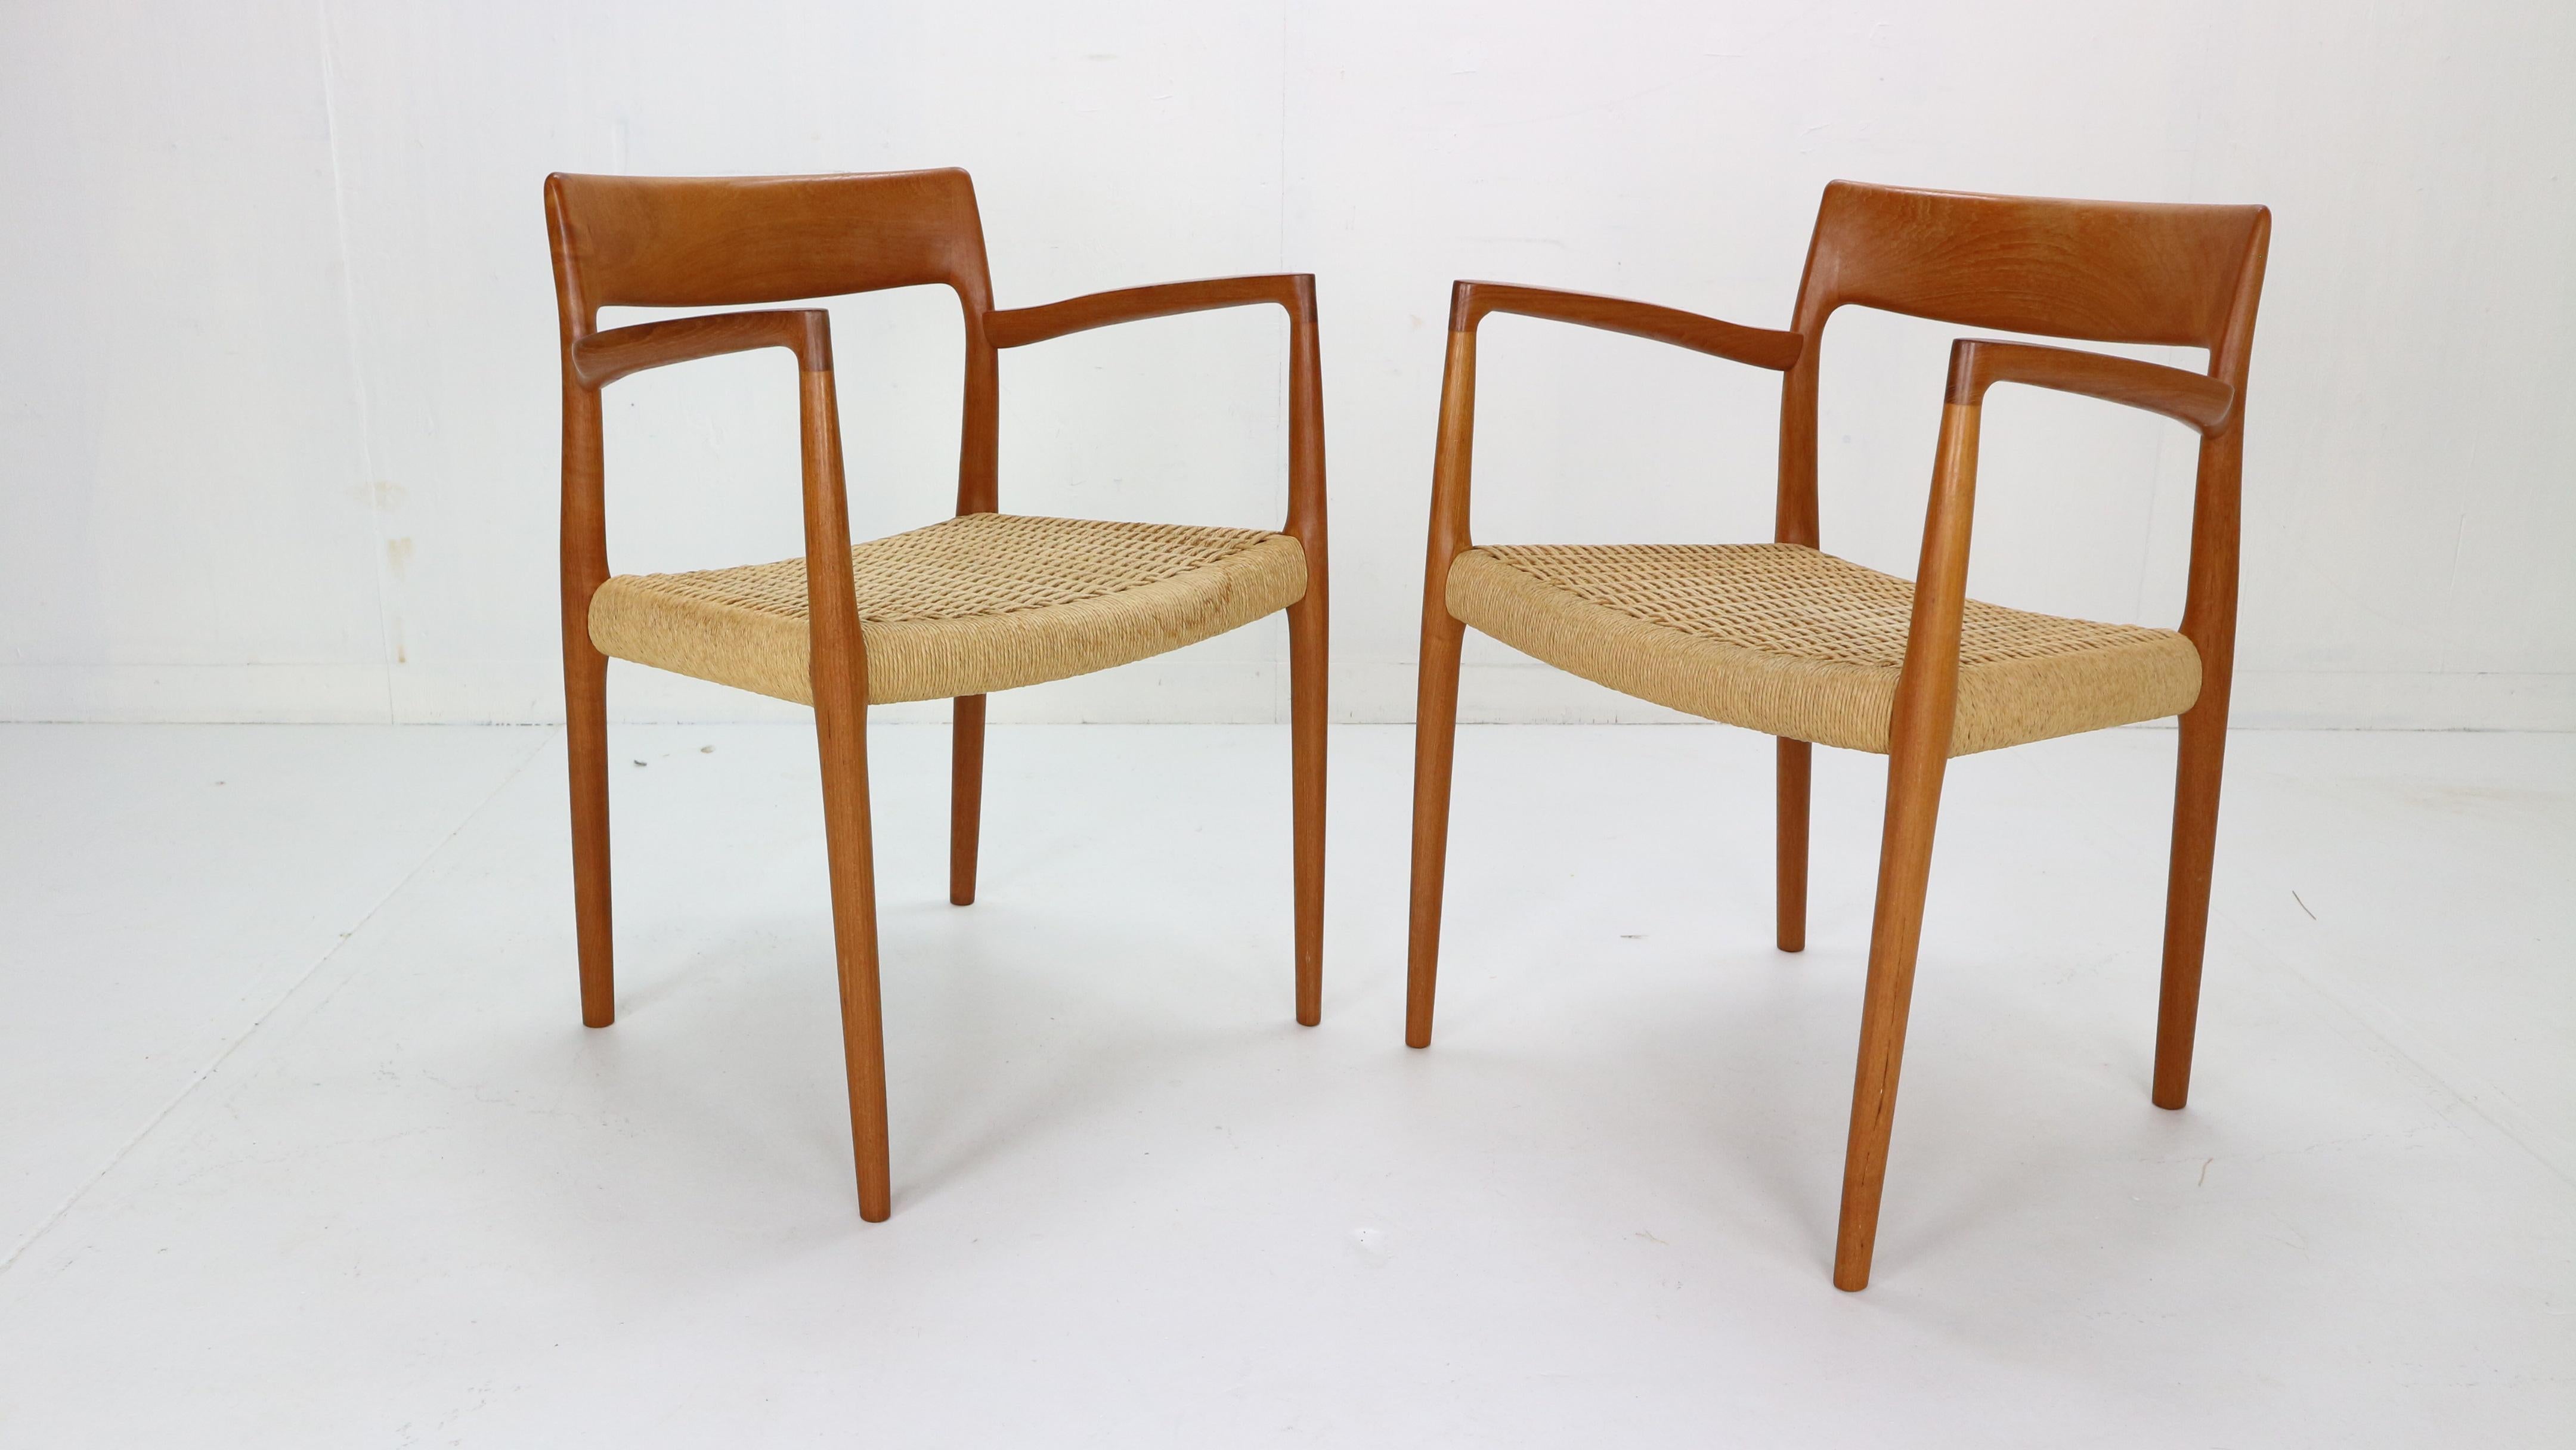 Scandinavian Modern period set of two chairs designed by Niels Otto Møller for J.L. Møllers Møbelfabrik manufacture, 1959, Denmark.
Teak curved wooden frame and paper-cord seating.
Model- 57, originally marked.
 
     
  